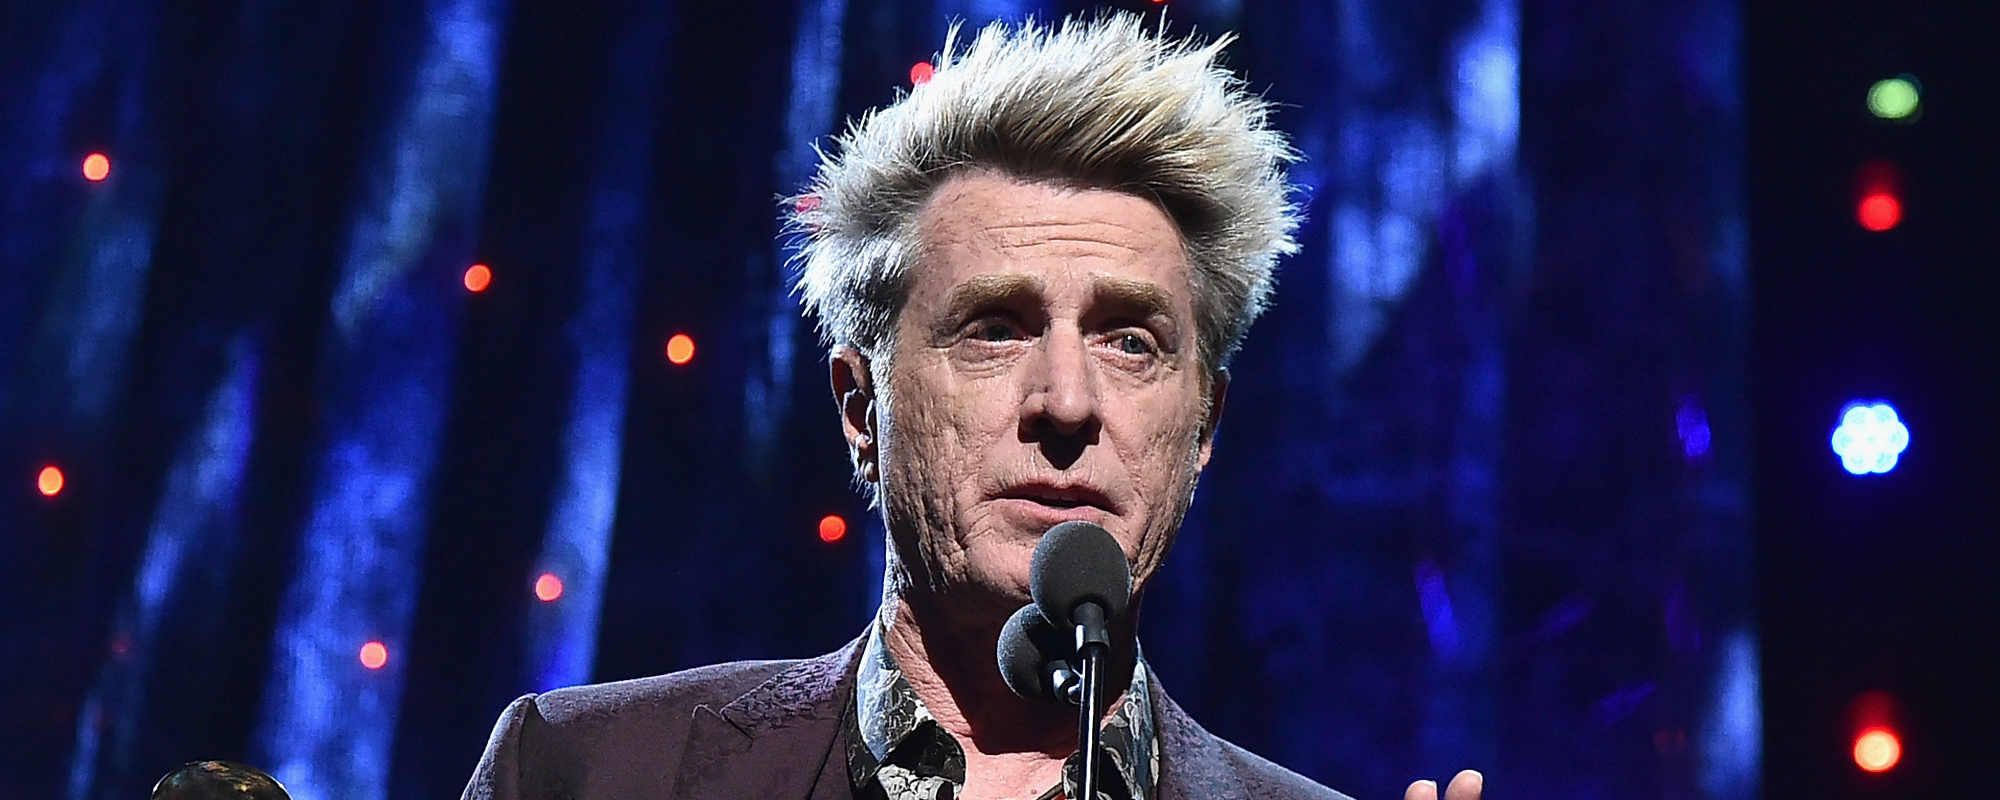 Ross Valory Breaks Silence on His Split With Journey